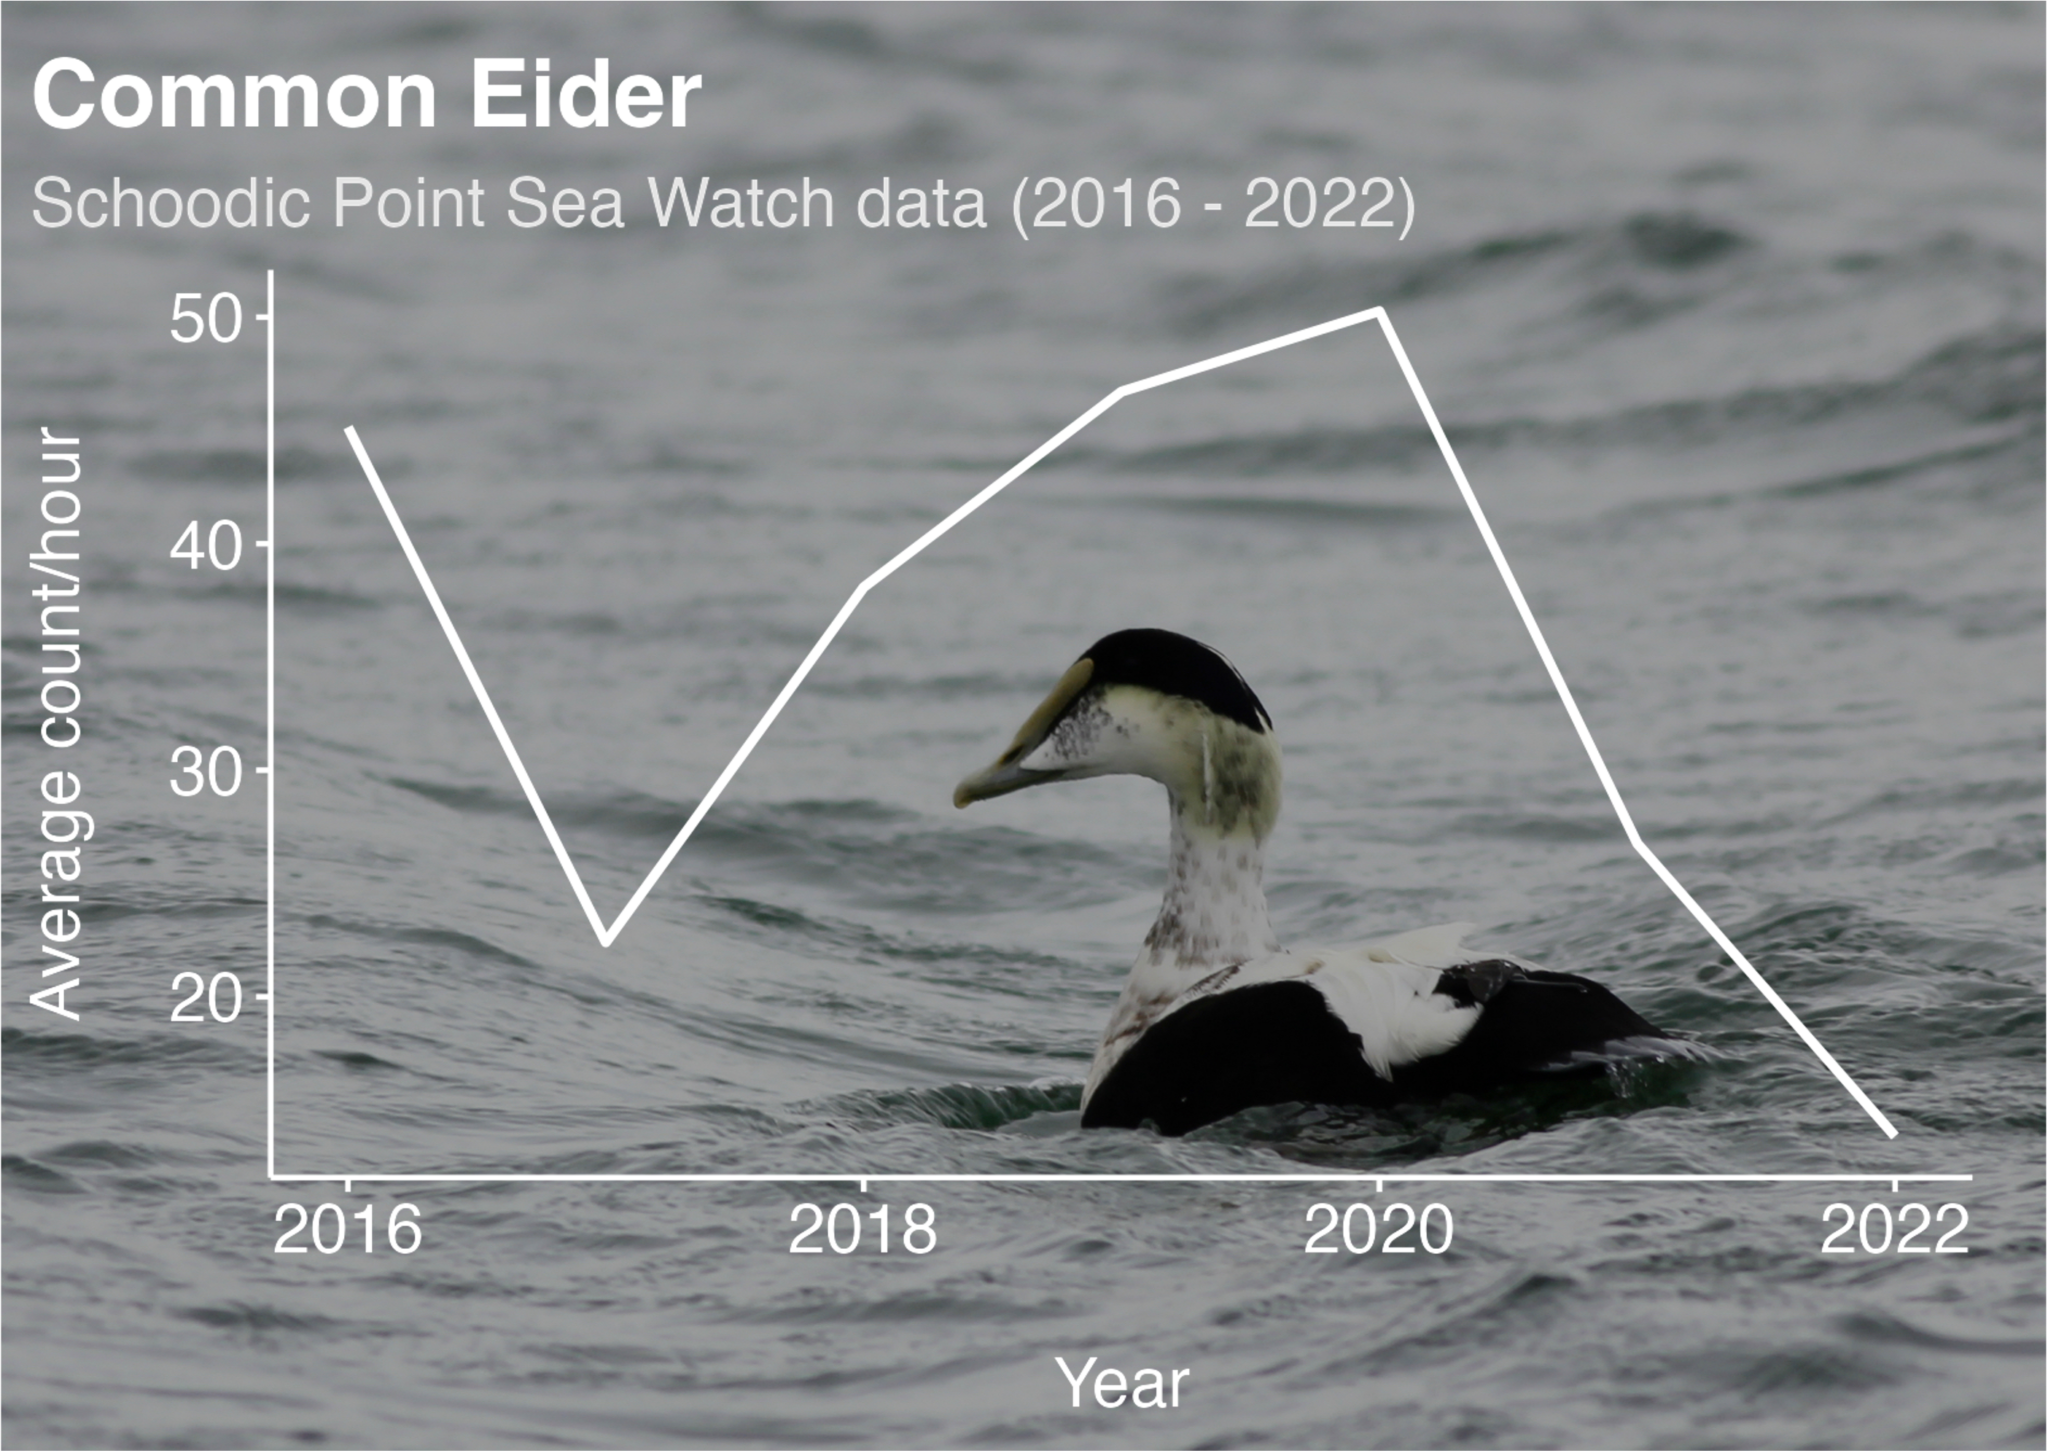 Graph showing common eider counts per hour from 2016 - 2022, according to Schoodic Point Sea Watch data.